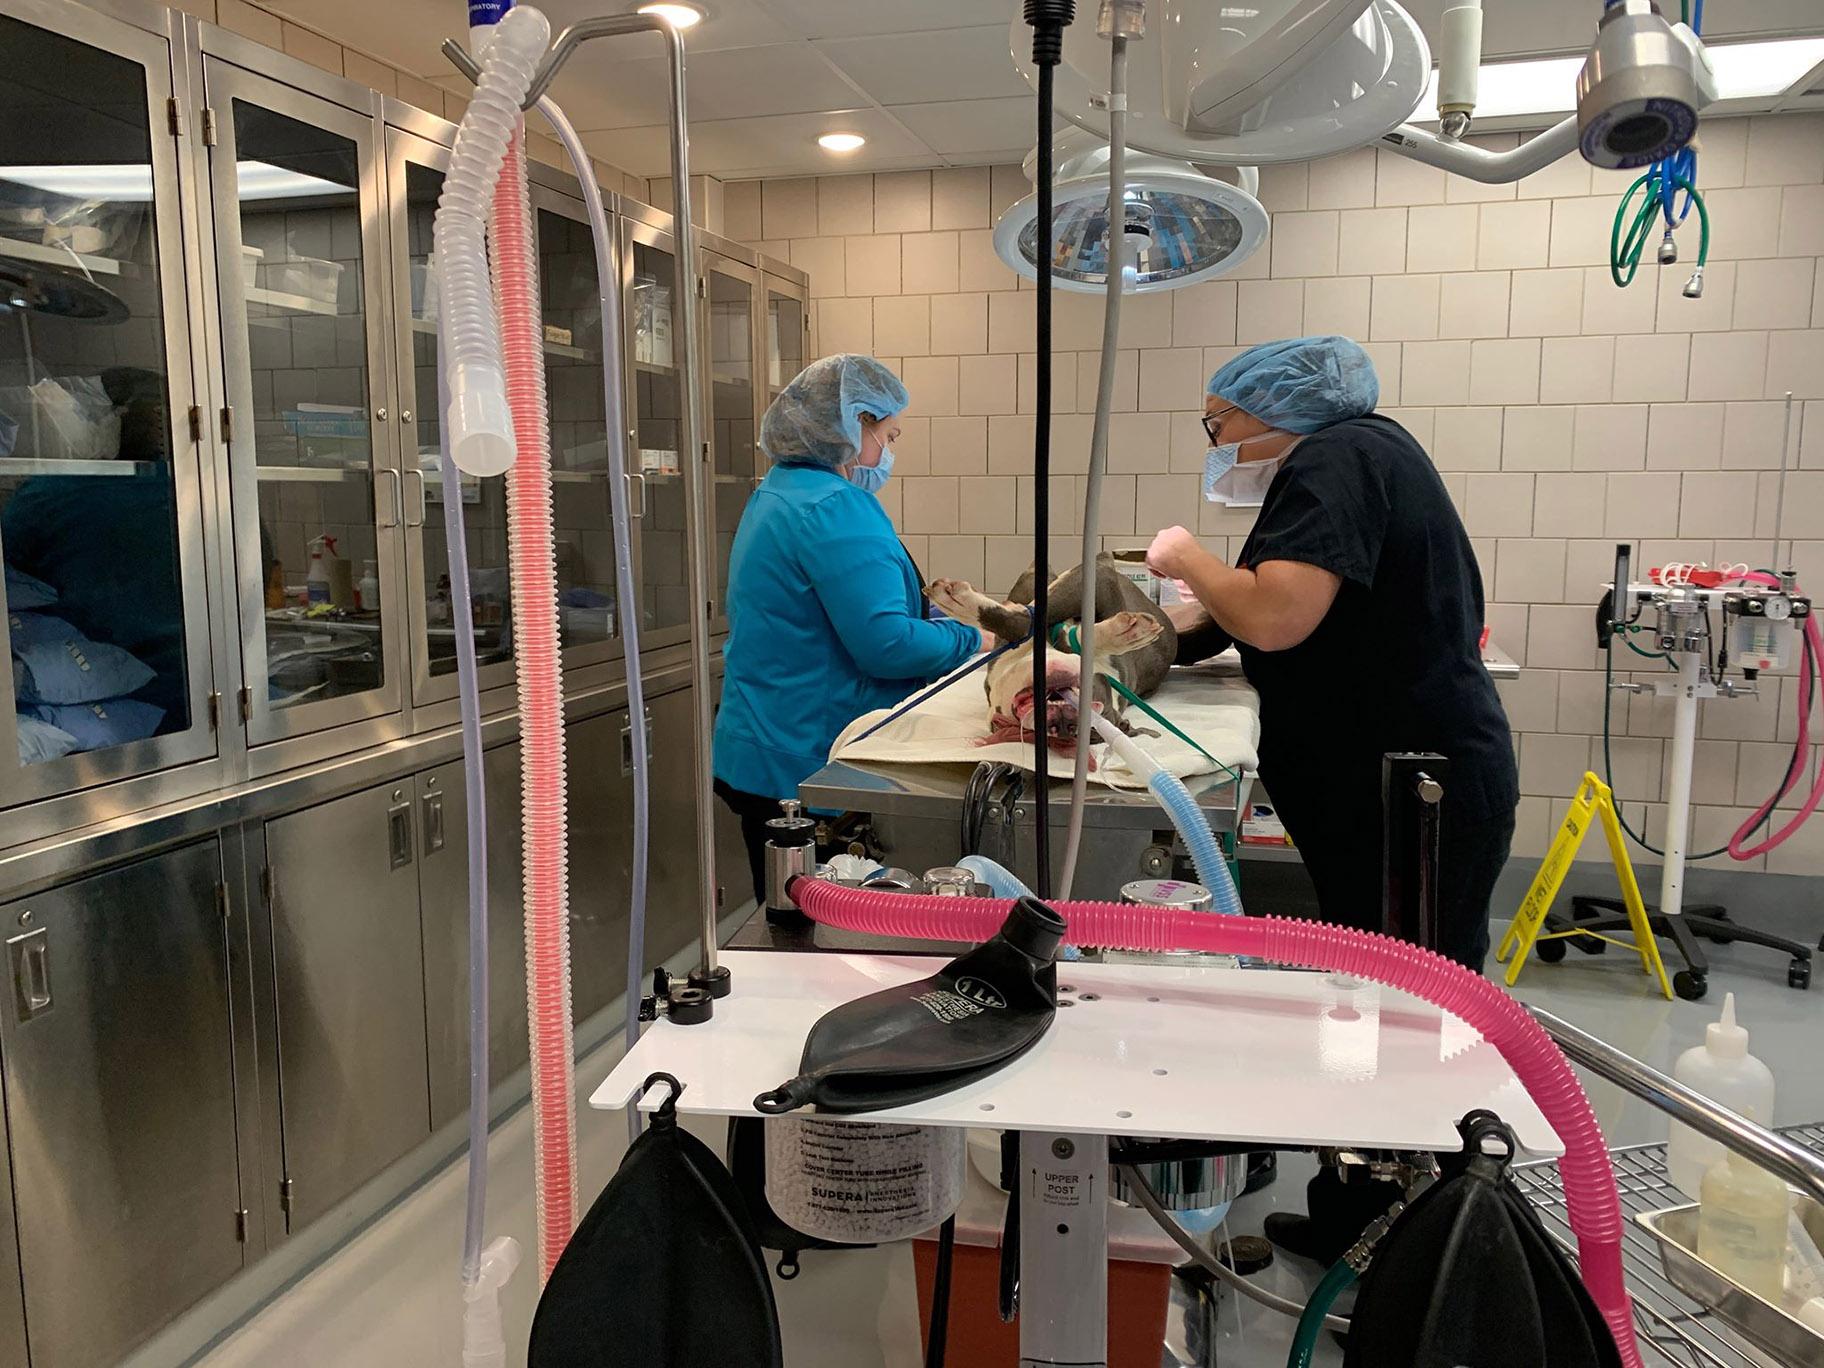 Chicago Animal Care and Control staff conduct a surgical procedure on a dog inside the renovated medical unit. (Courtesy Chicago Animal Care and Control)